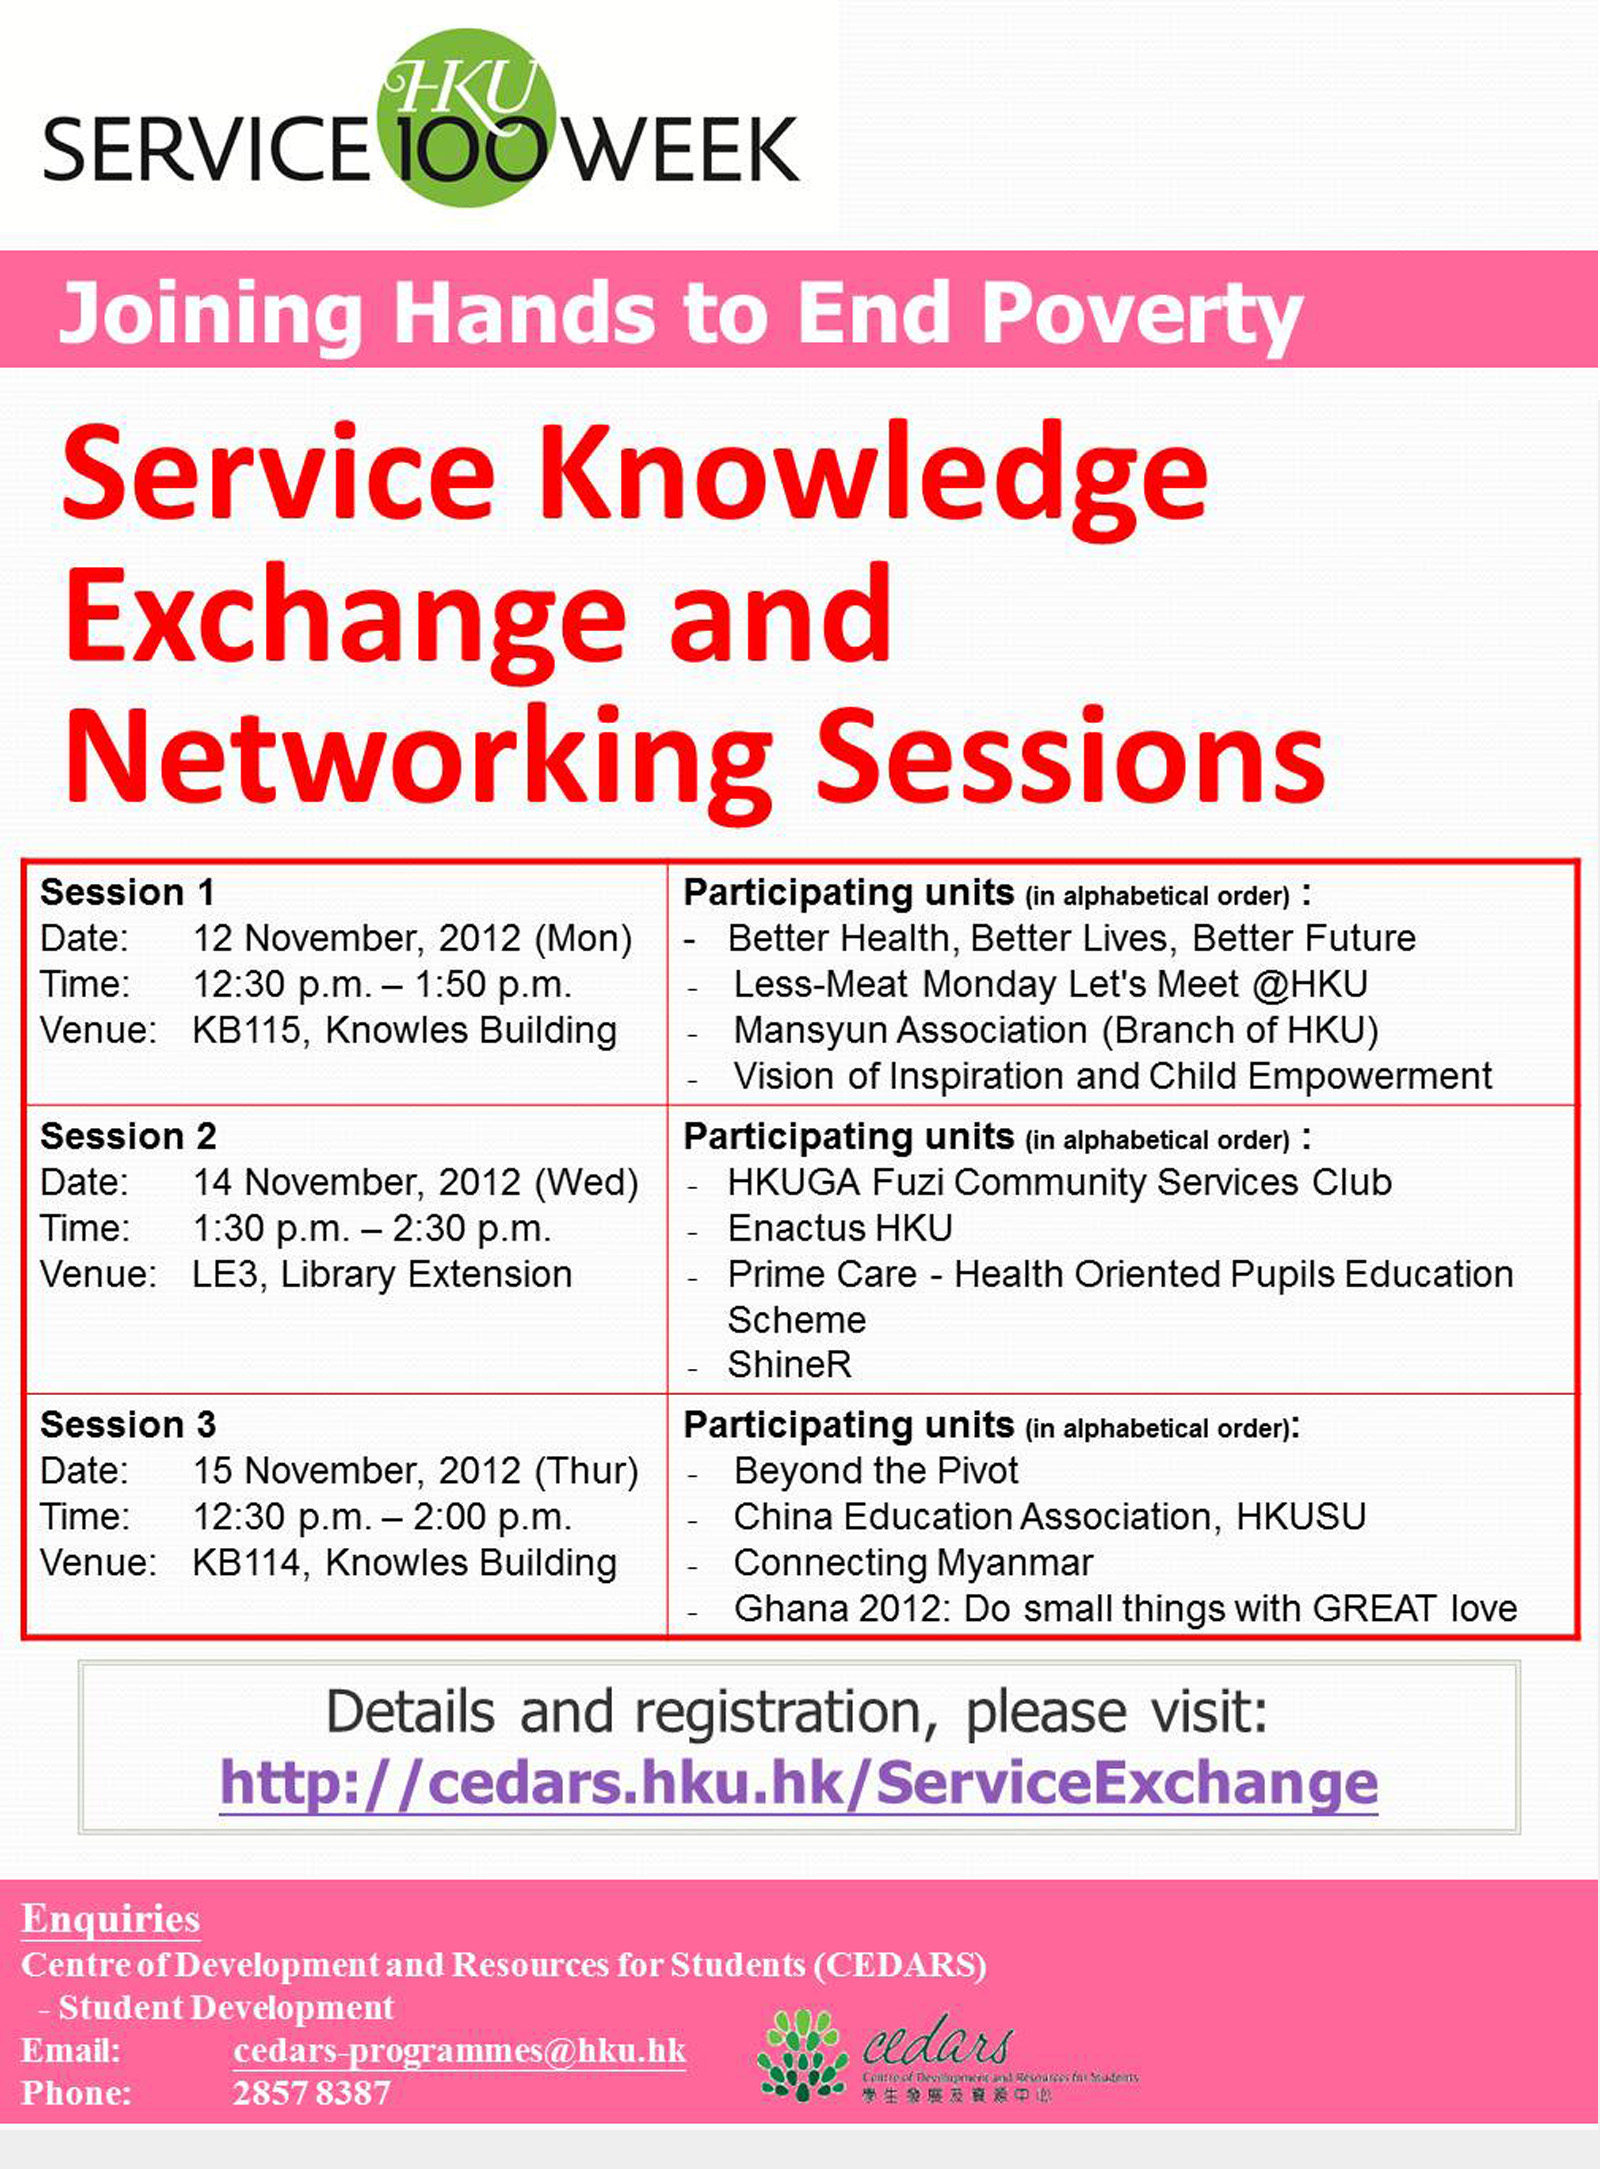 SERVICE100 WEEK: Service Knowledge Exchange and Networking Sessions